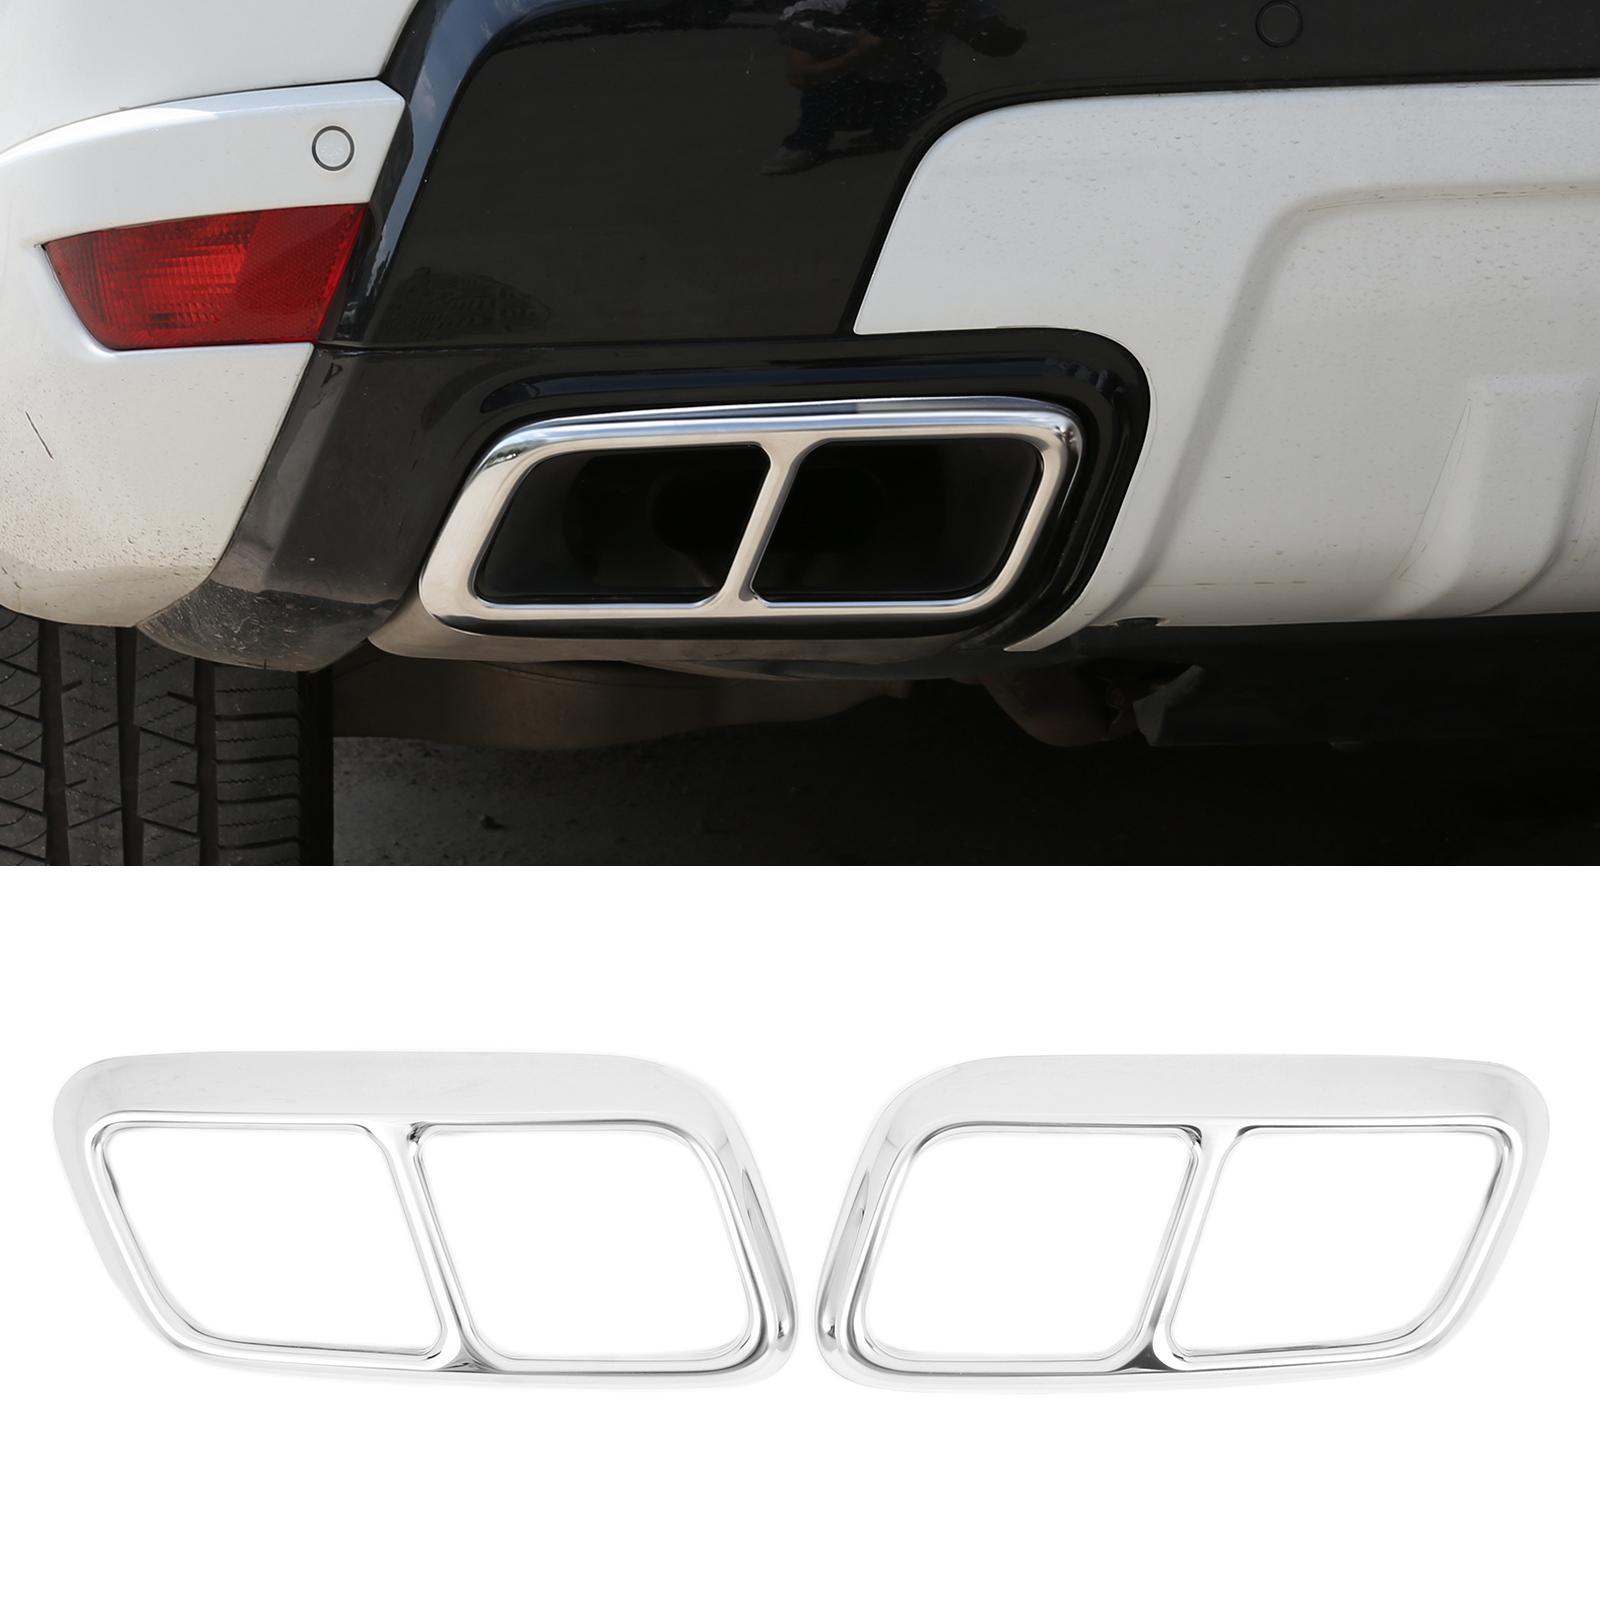 Exhaust Tail Pipe Trim Cover for Range Rover Parts Accessories